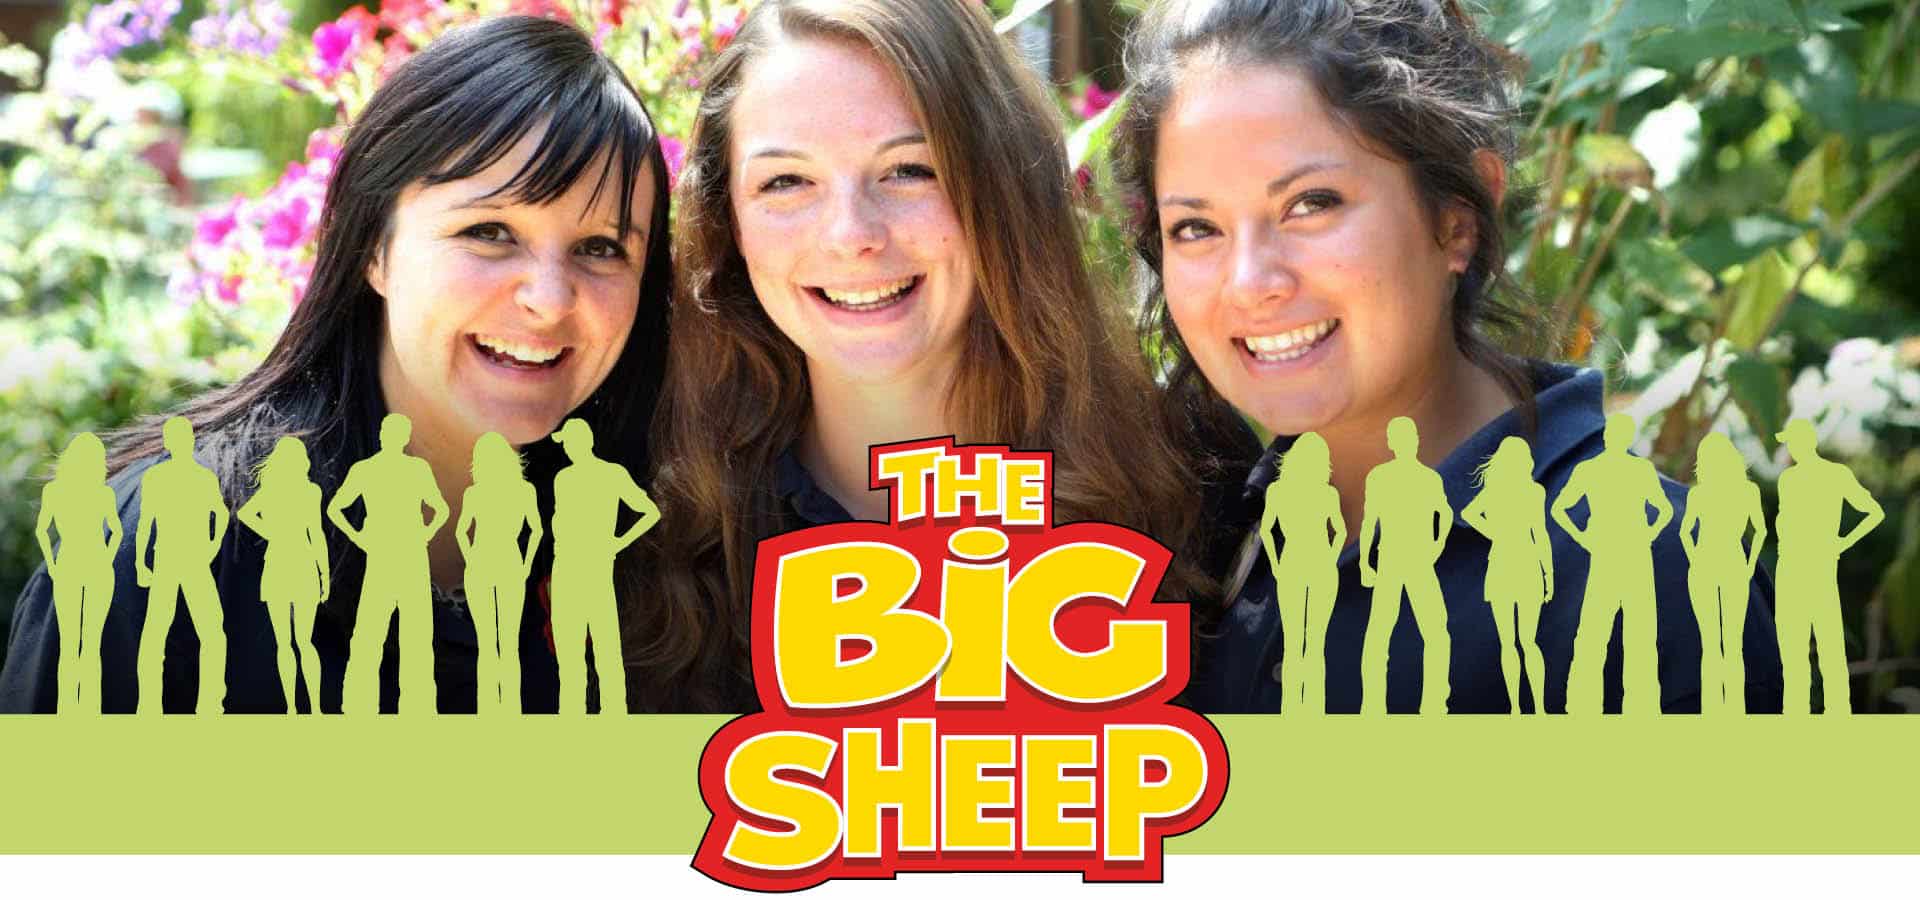 About The Big Sheep